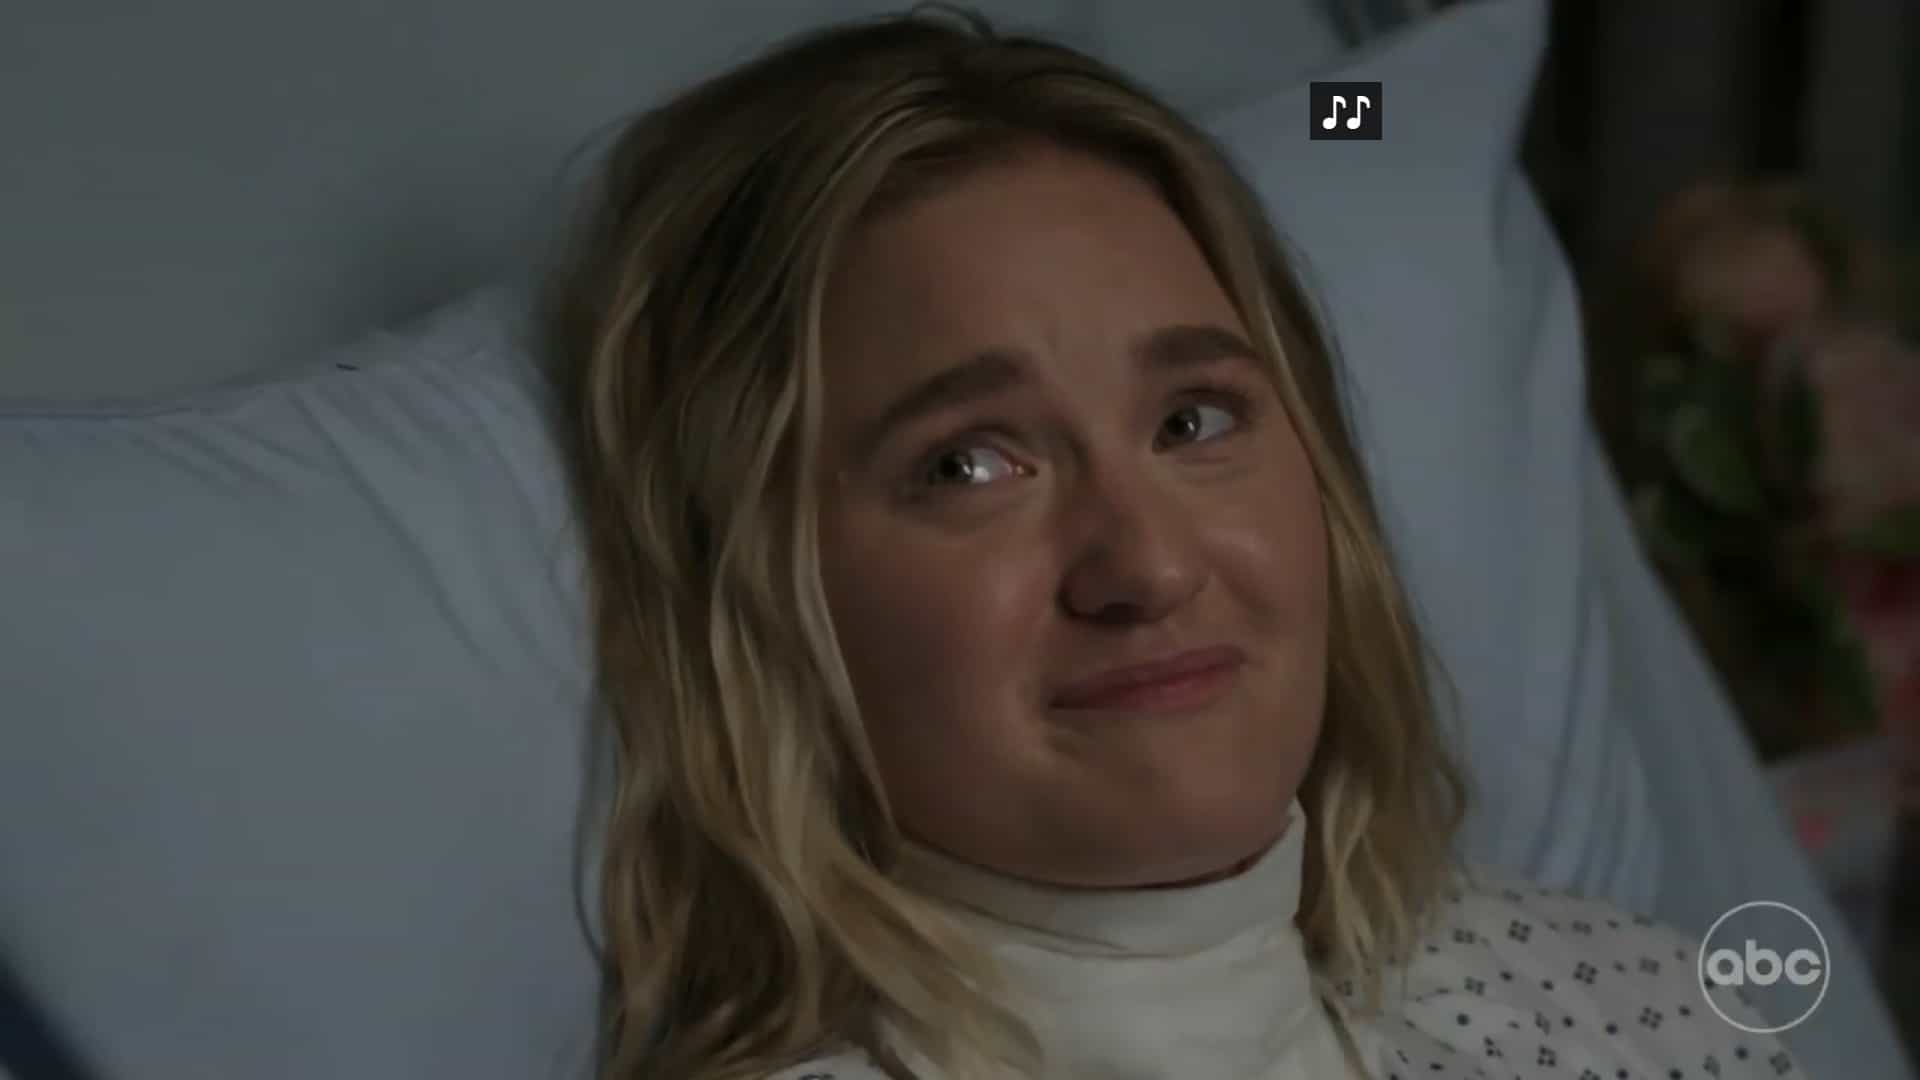 Nelly (AJ Michalka) smiling after her surgery